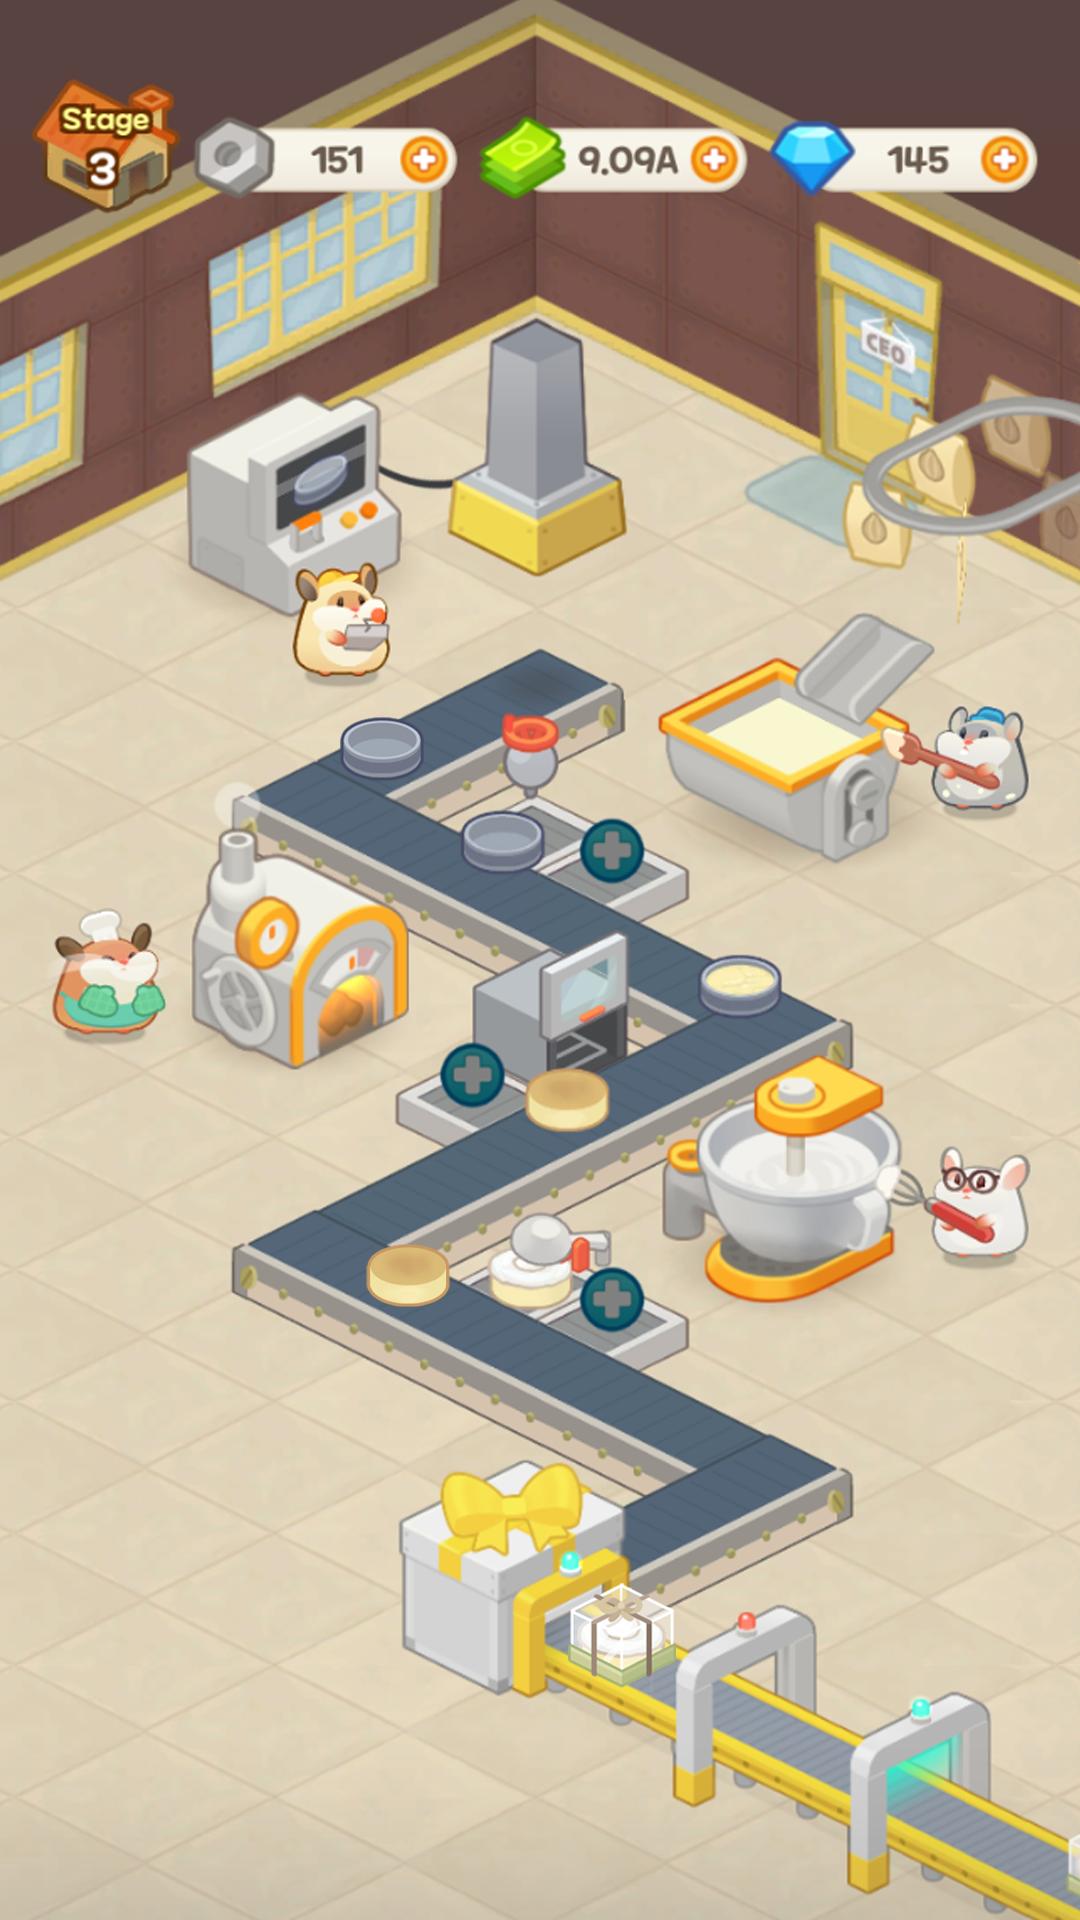 Hamster's Cake Factory - Idle Baking Manager 1.0.2 Screenshot 13